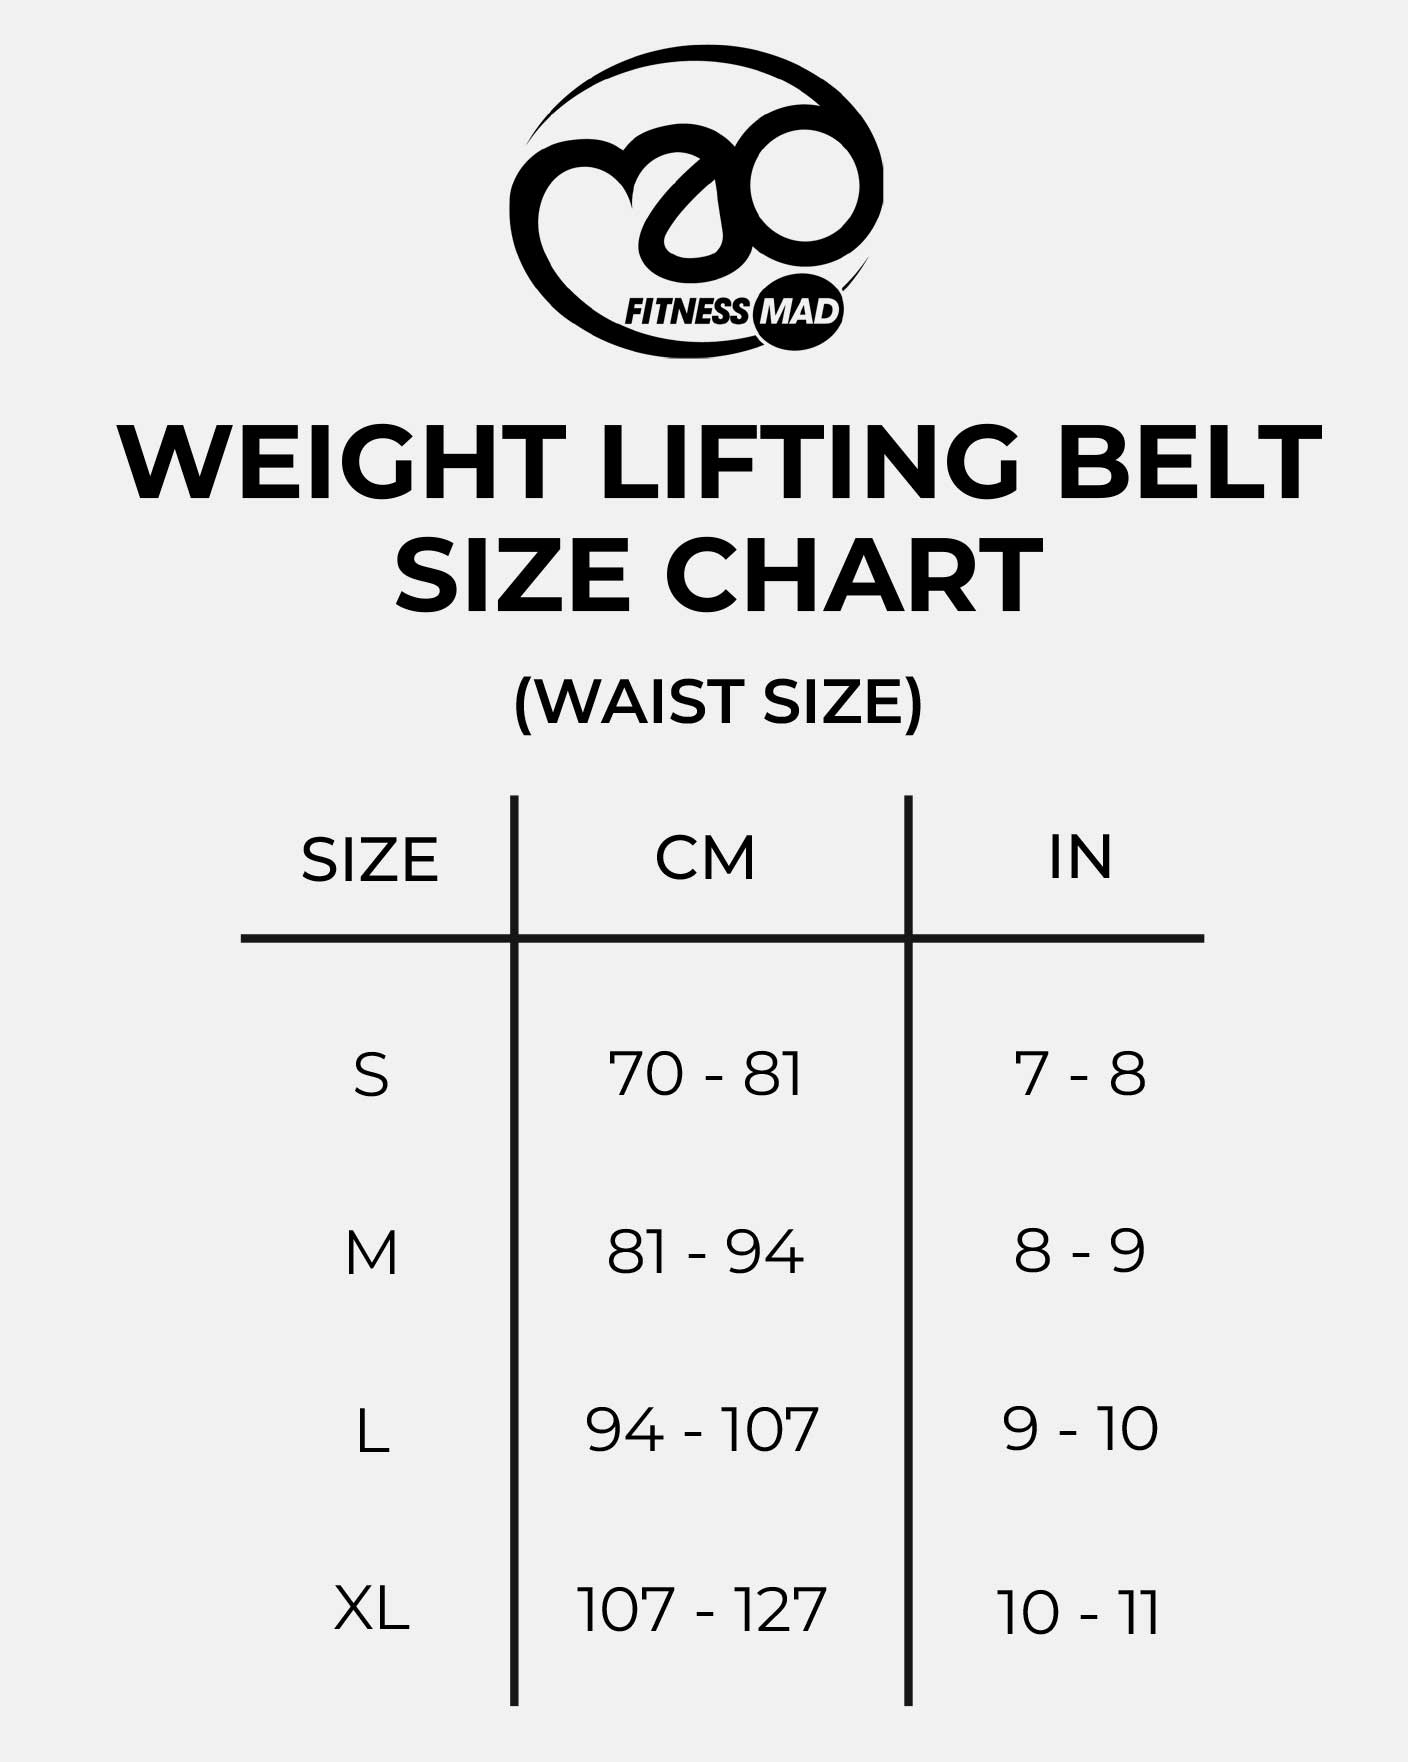 Fitness-Mad weightlifting belt